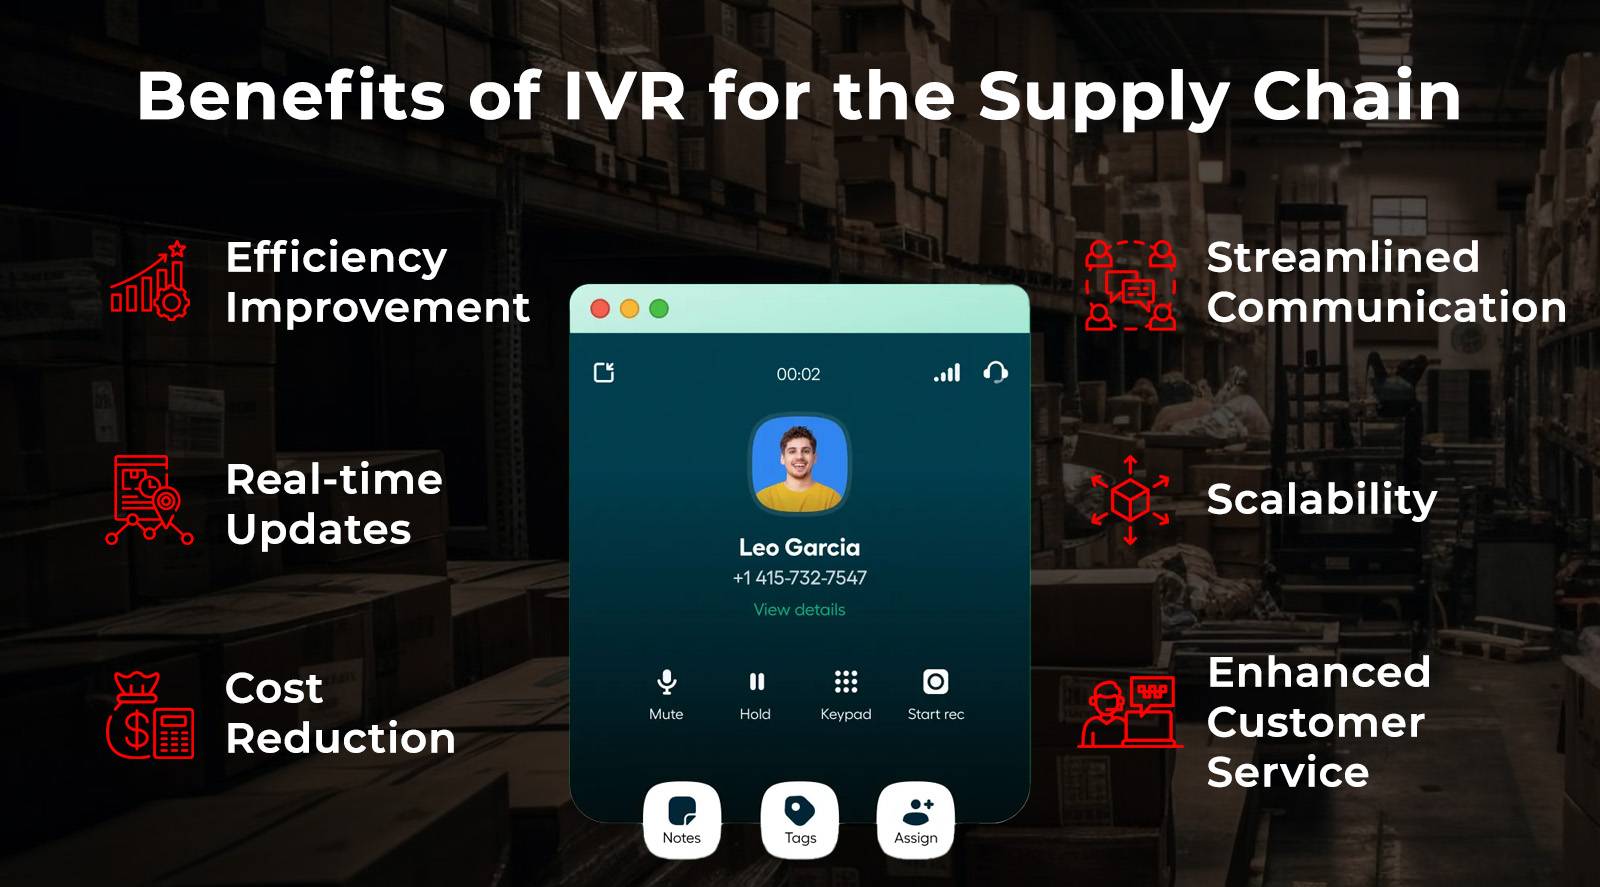 Benefits of IVR for the Supply Chain